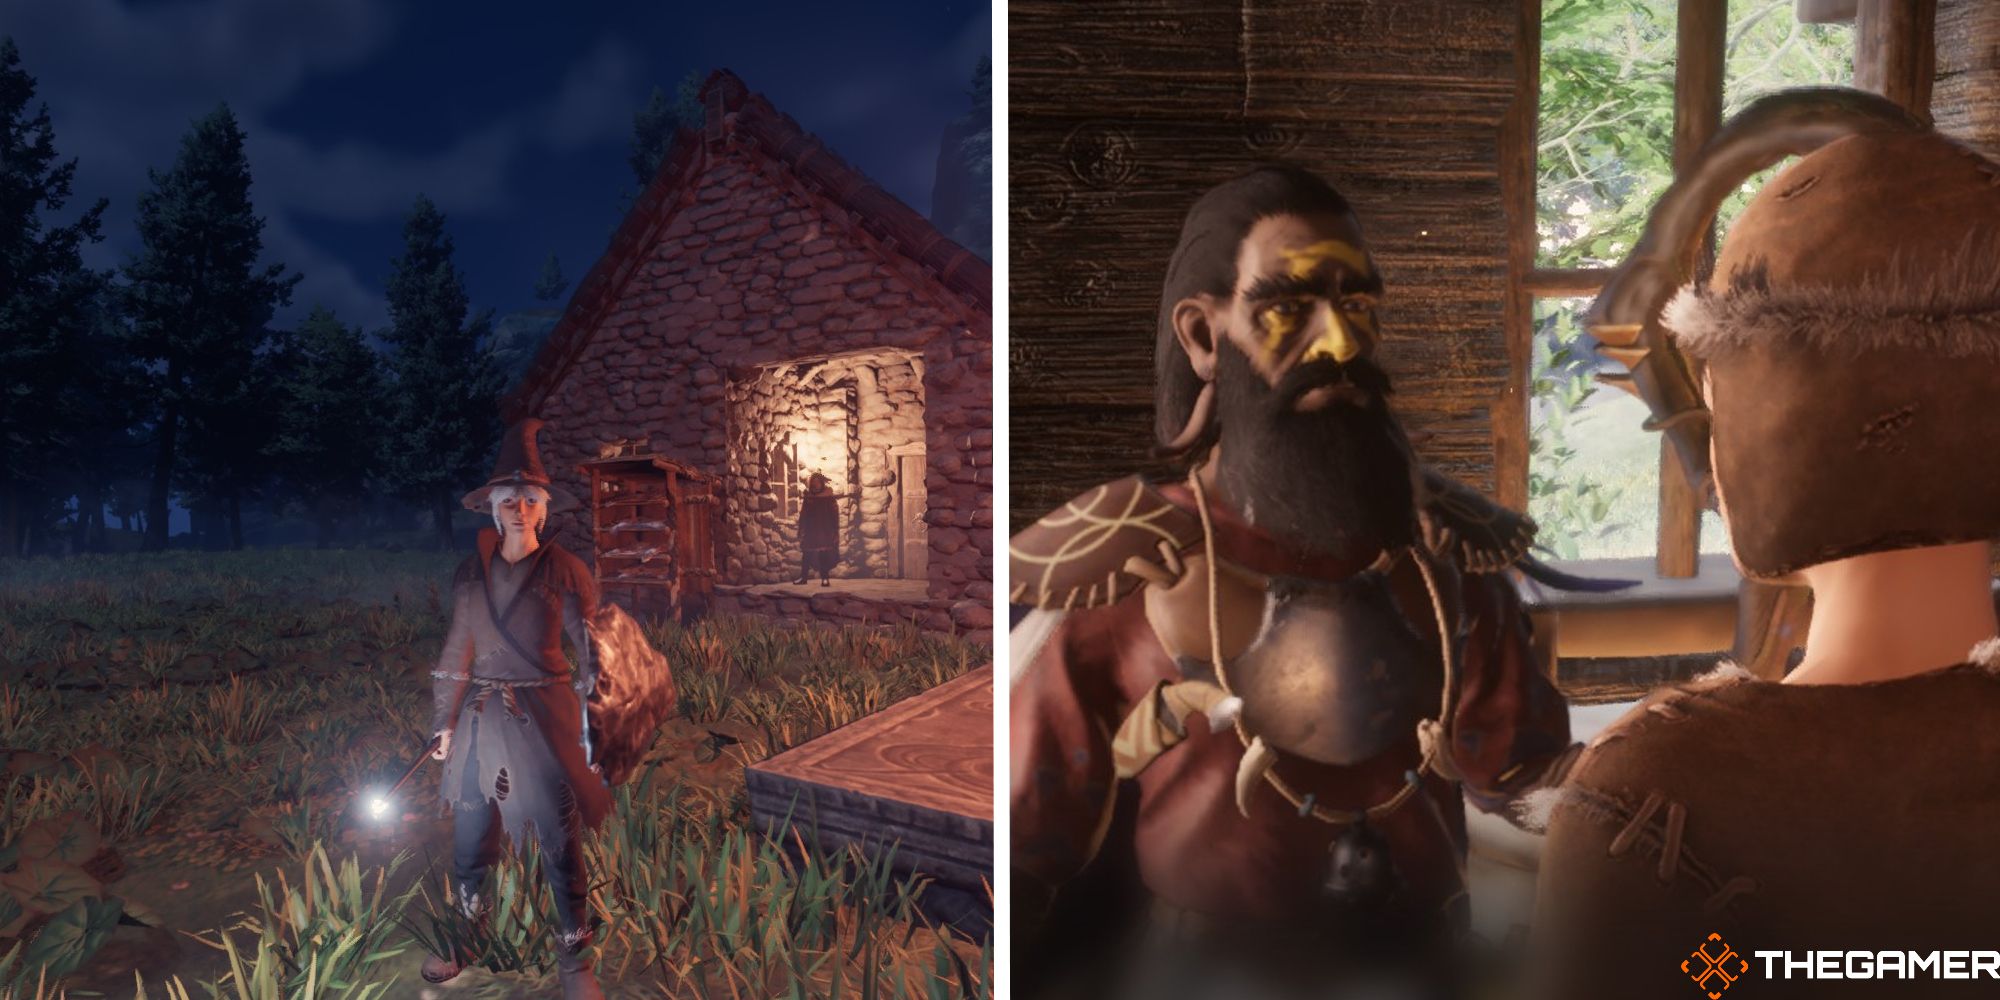 enshrouded split image showing player near altar next to image of player talking to balthazar the alchemist-1